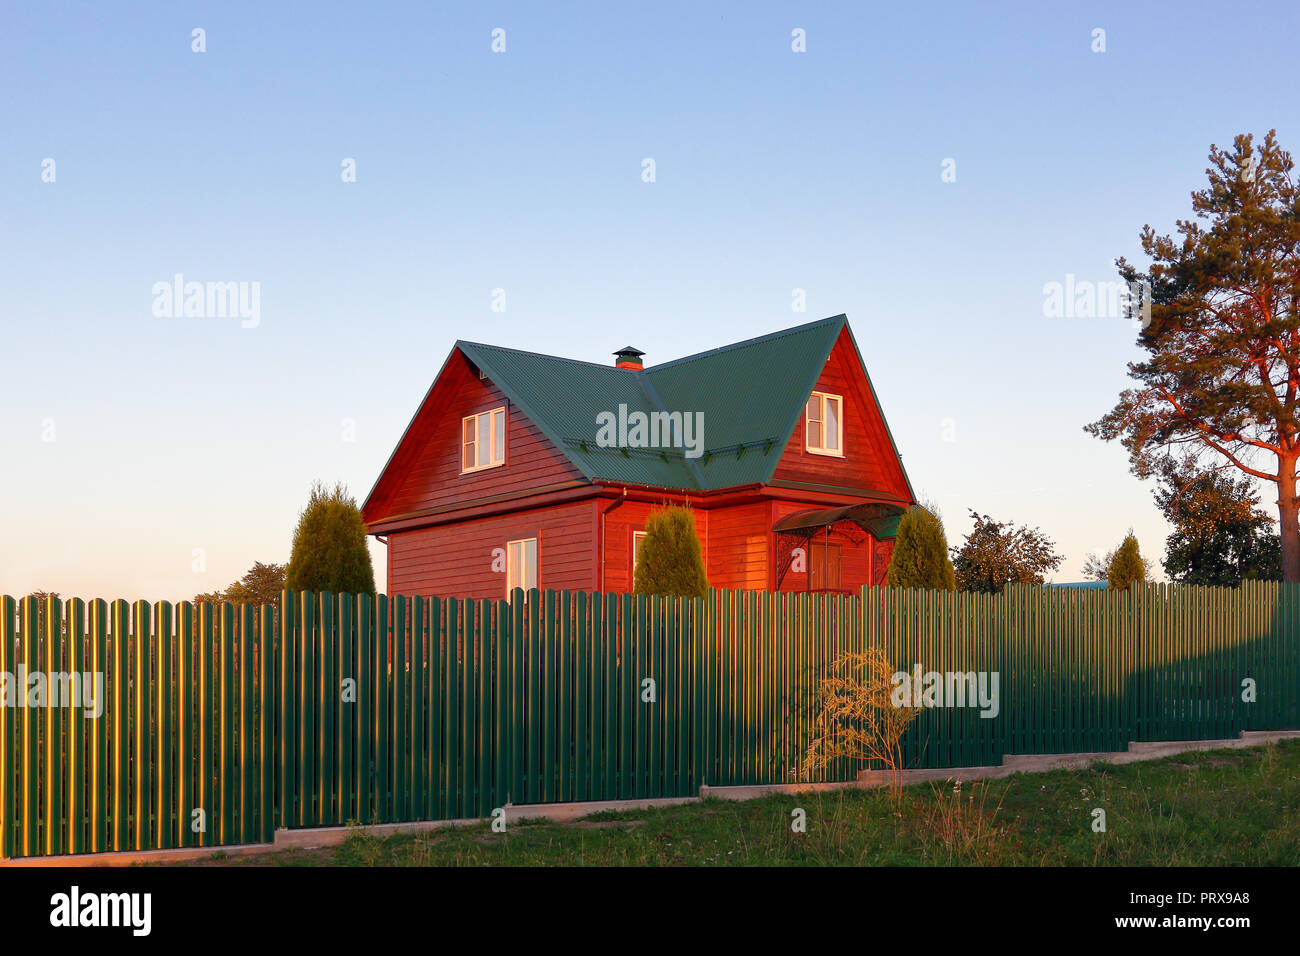 Wooden house under green metal roof house behind the green fence sunset lihgts photo Stock Photo